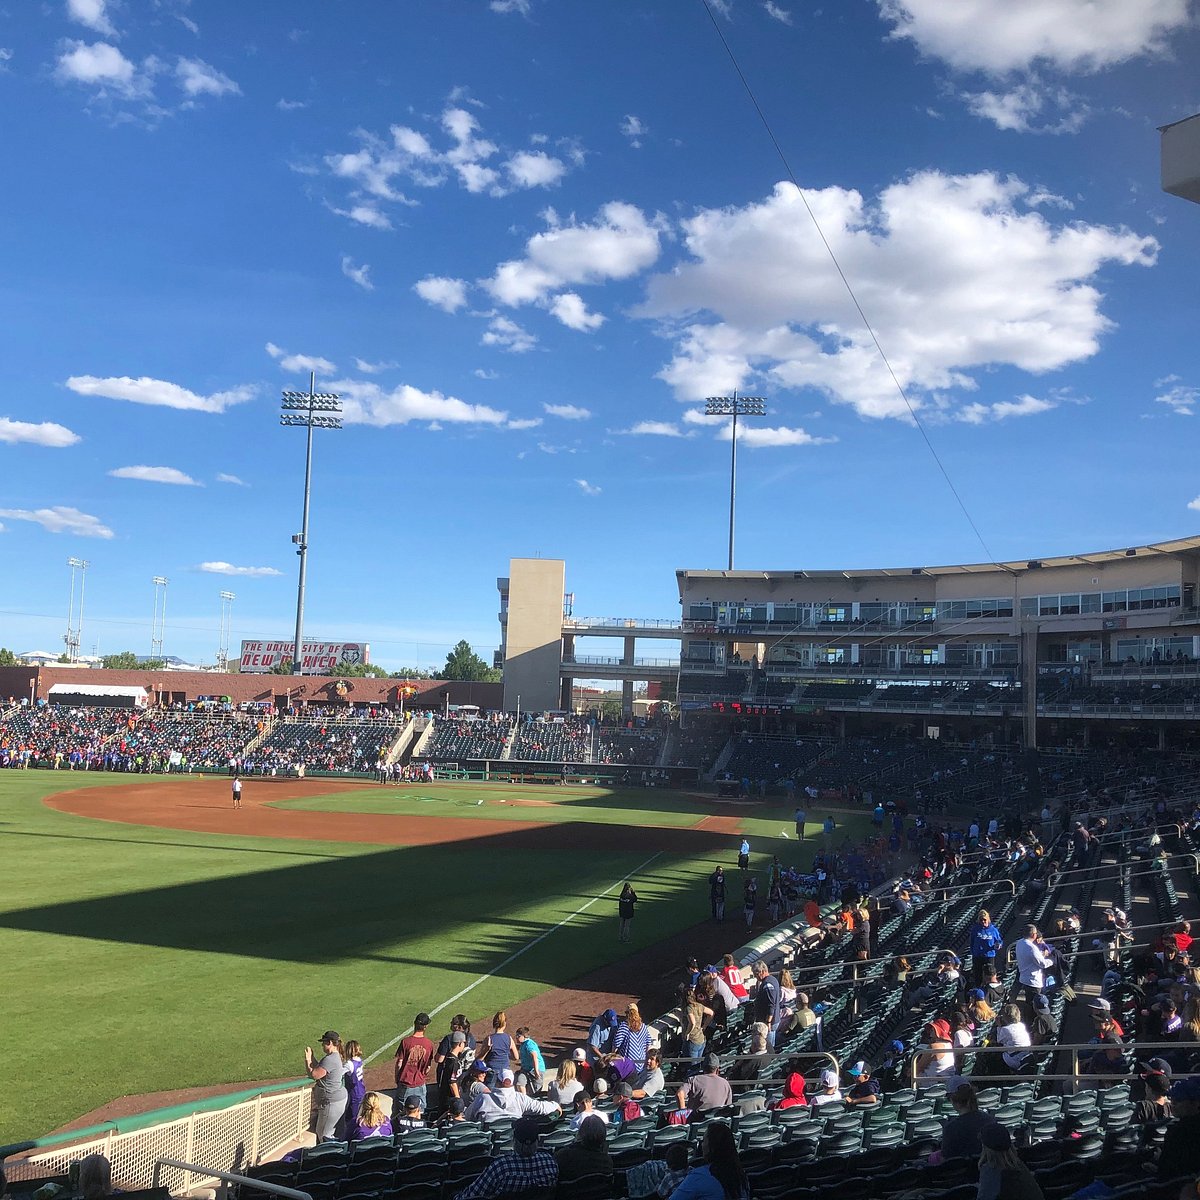 Albuquerque Isotopes Baseball   8 All You Need to Know BEFORE ...